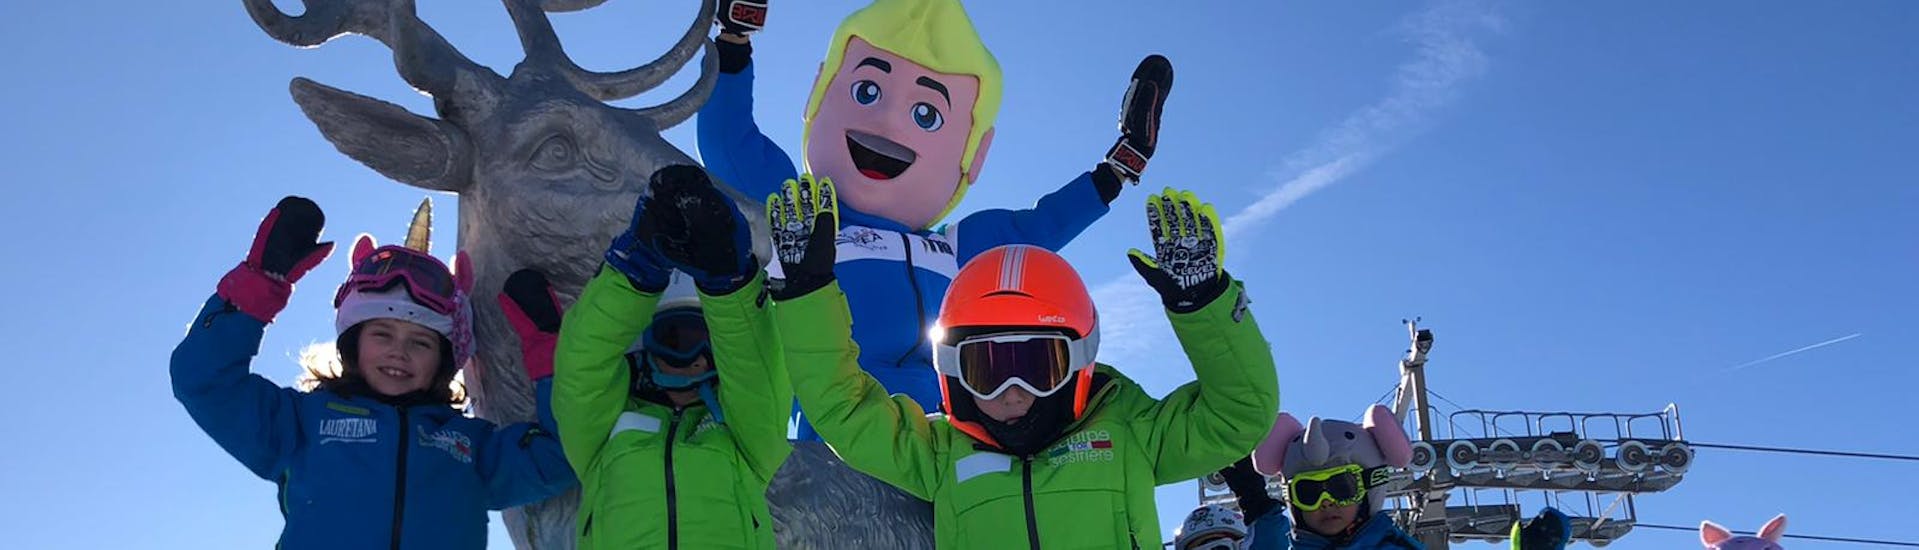 Kids cheering with mascotte in Kids Ski Lessons (4-8 y.) for First Timers Scuola Sci Vialattea Sauze d'Olux